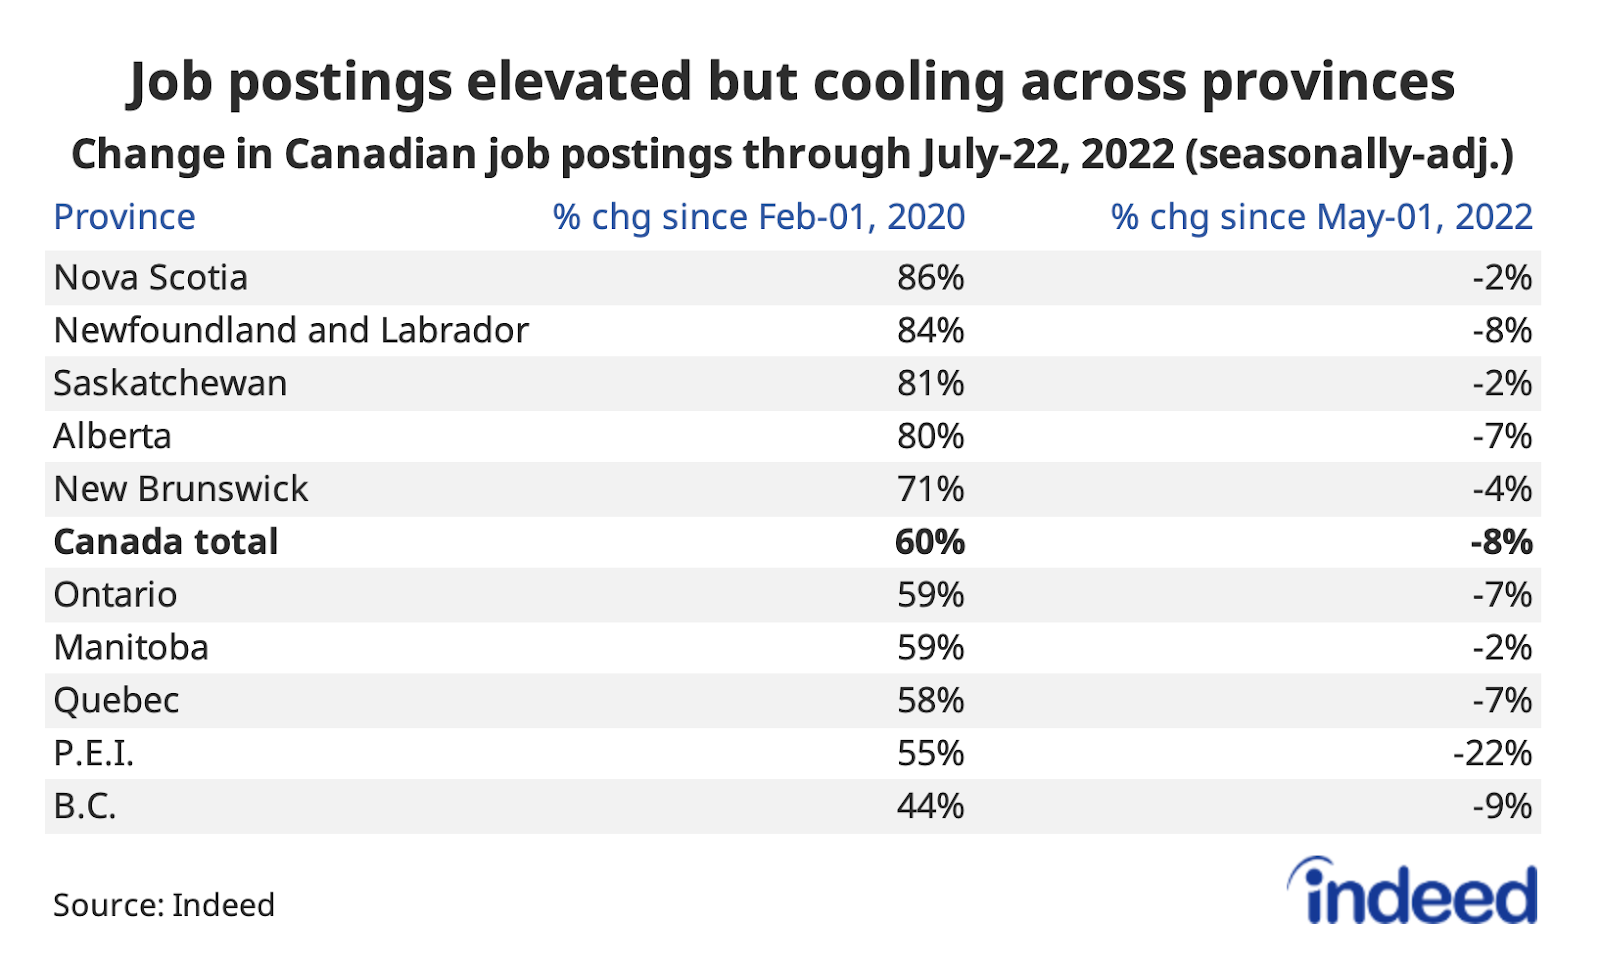 ​​Table titled “Job postings elevated but cooling across provinces.”